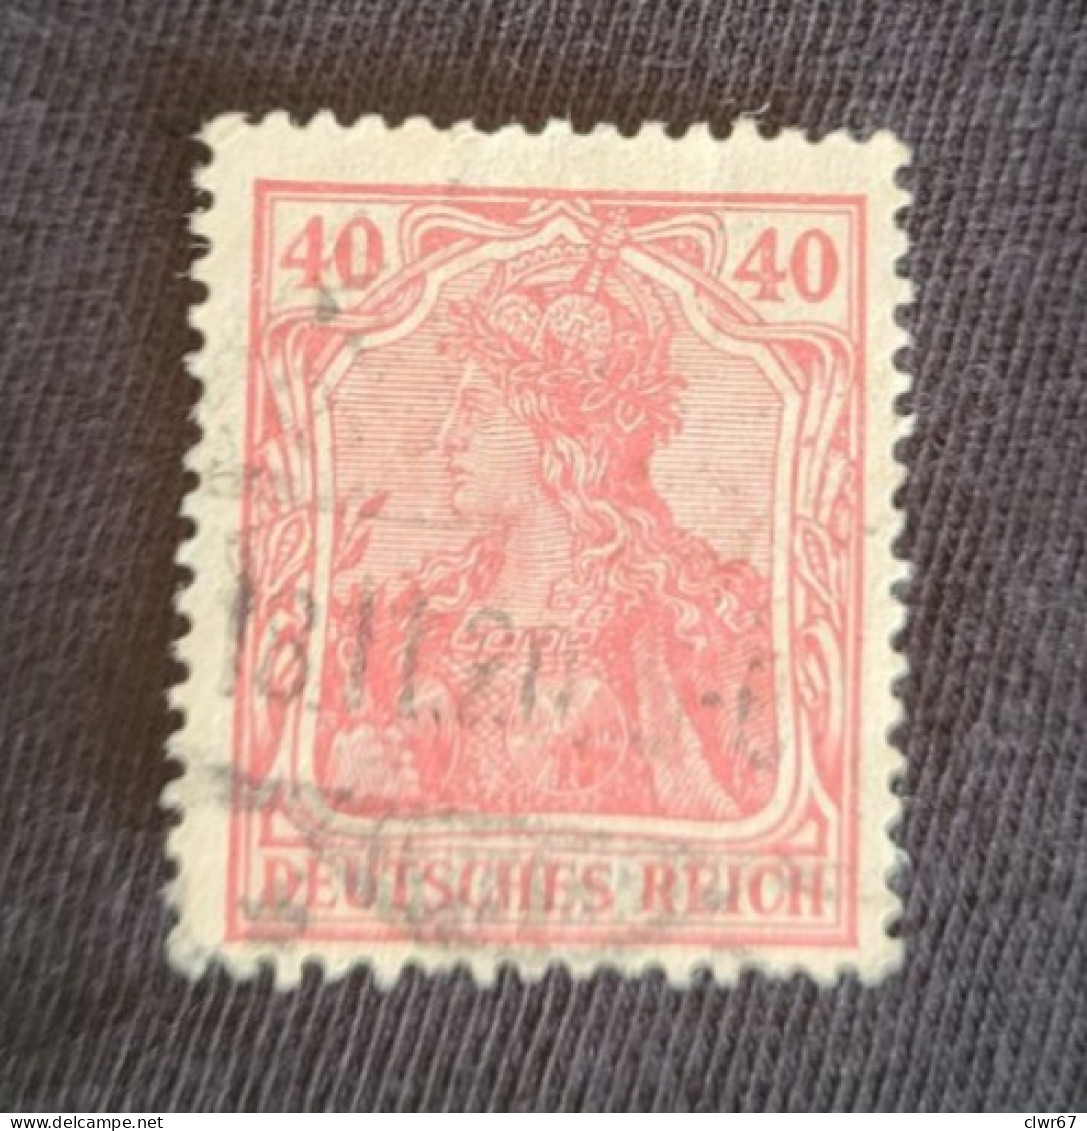 40 Pf. Germania III, Deutsches Reich - Used Stamps